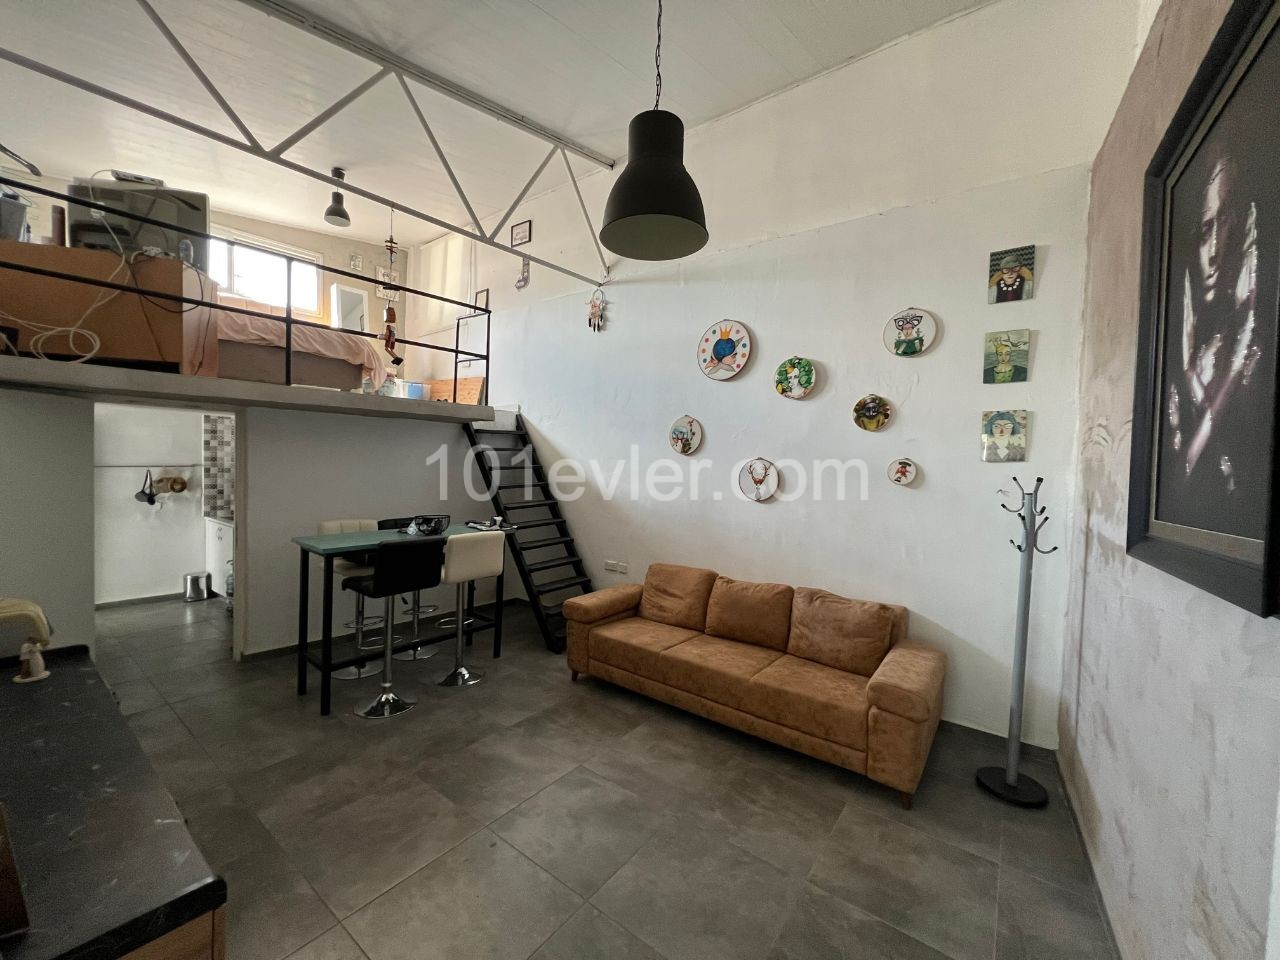 OFFICE FOR RENT + ONE BEDROOM FOUNDATION PROPERTY IN NICOSIA SURLARICI! ** 